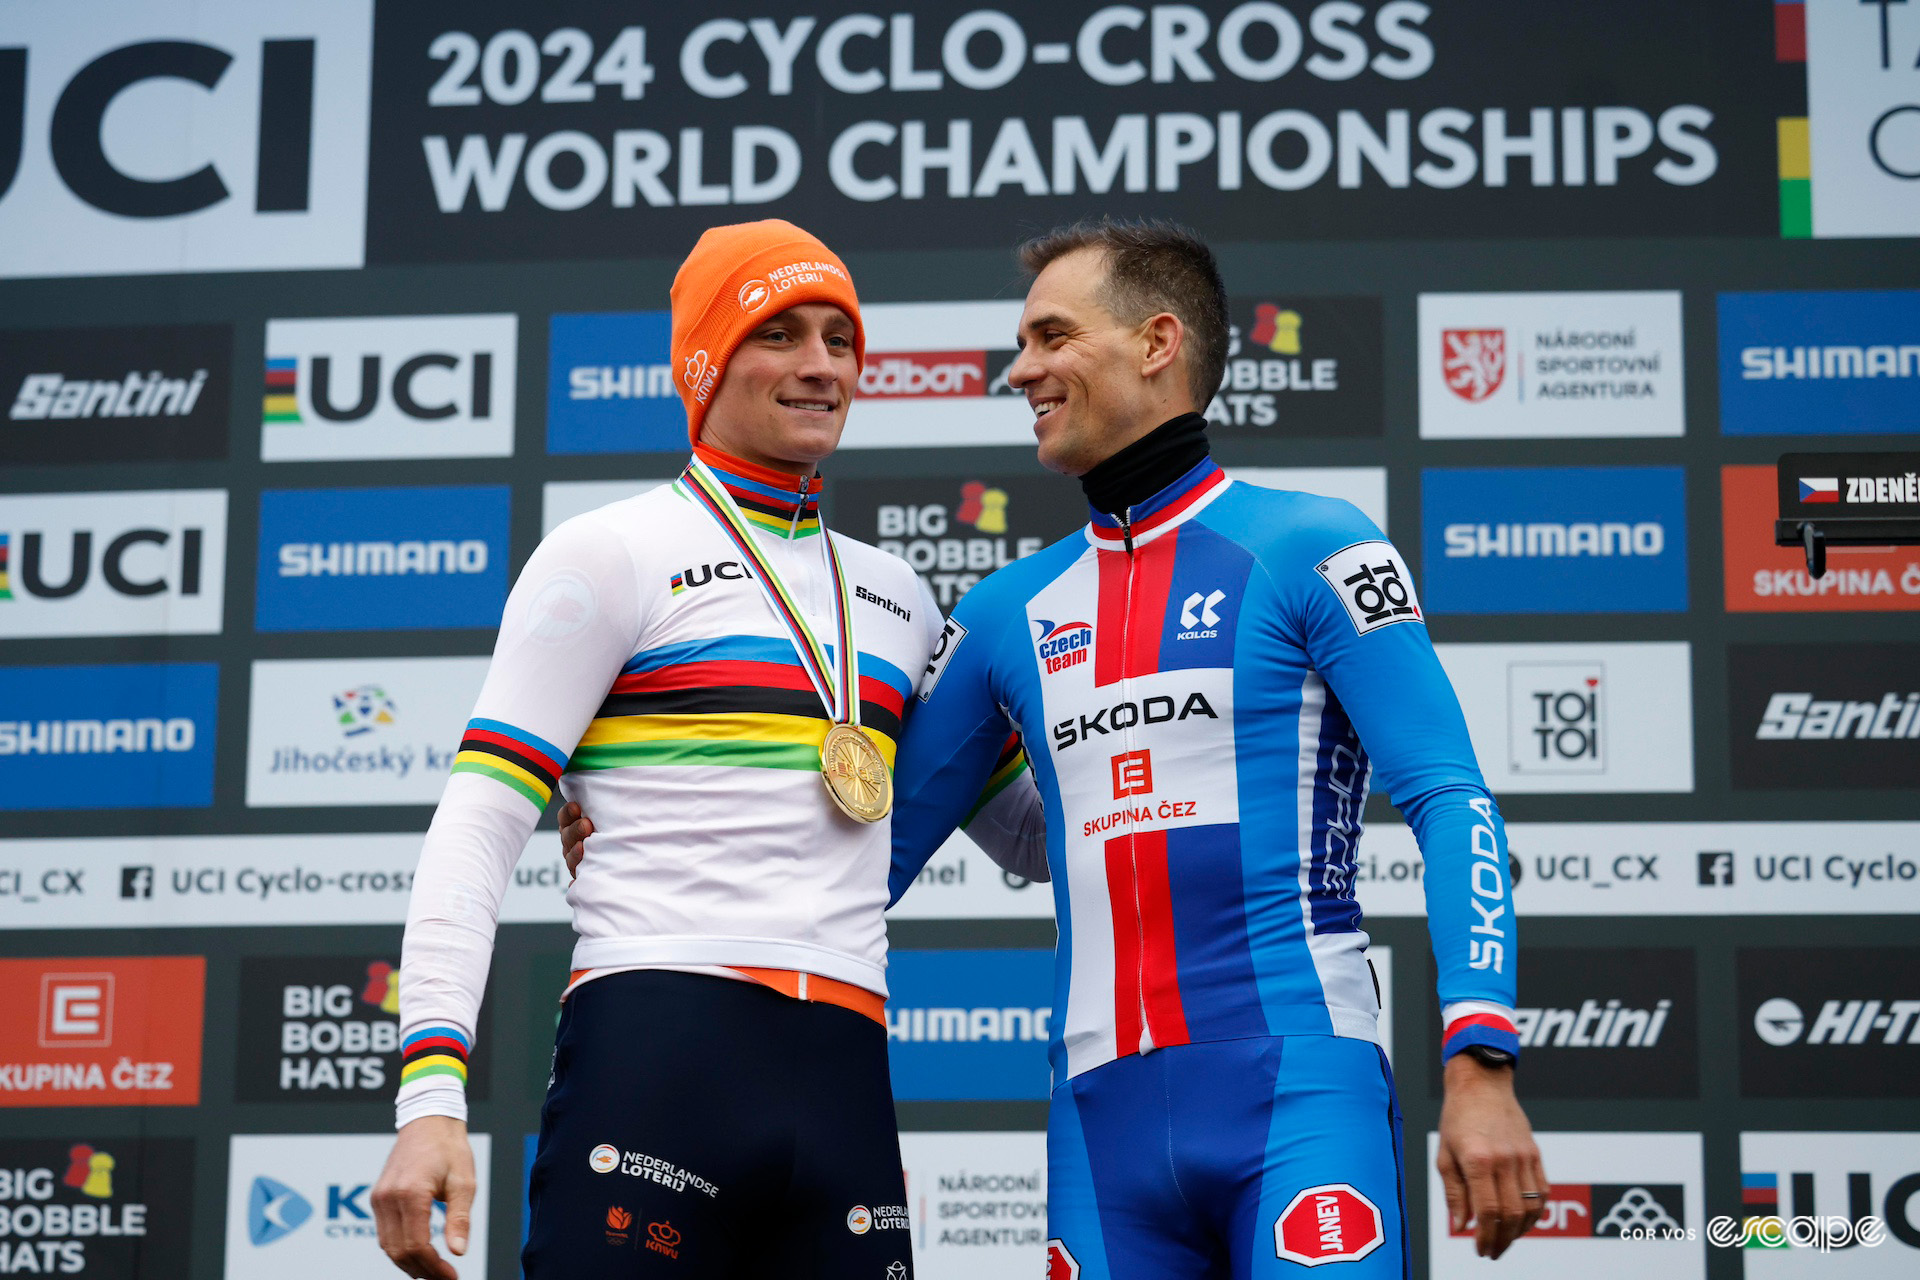 Mathieu van der Poel, wearing a new rainbow jersey and gold medal, embraces retiring Czech rider Zdeněk Štybar on the podium after the 2024 Cyclocross World Championships in Tábor.